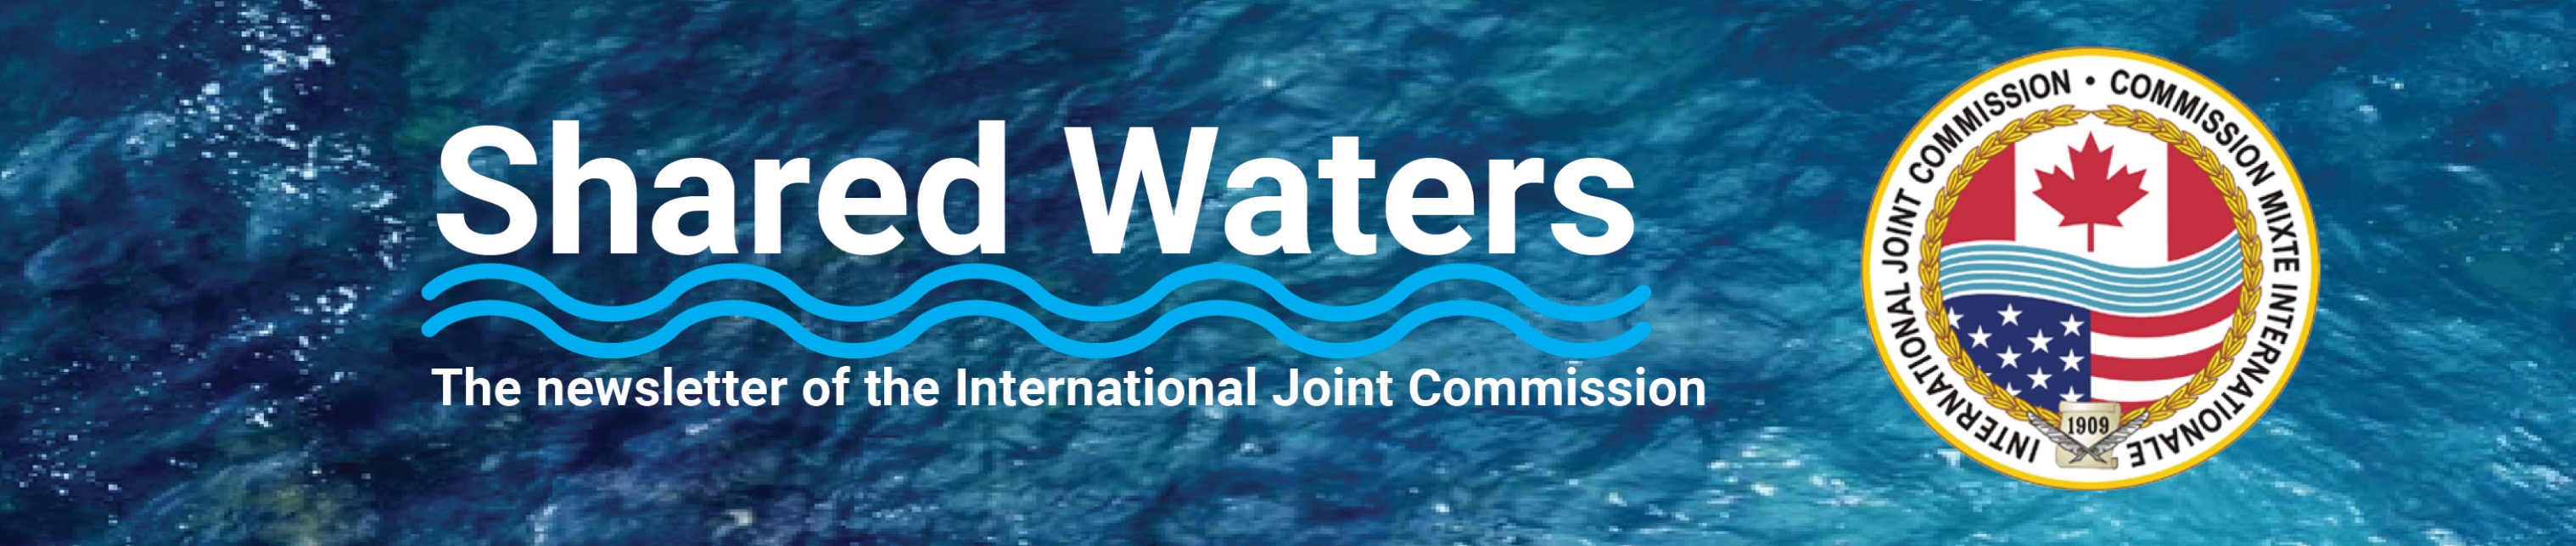 Logo of the Shared Waters newsletter: The newsletter of the International Joint Commission